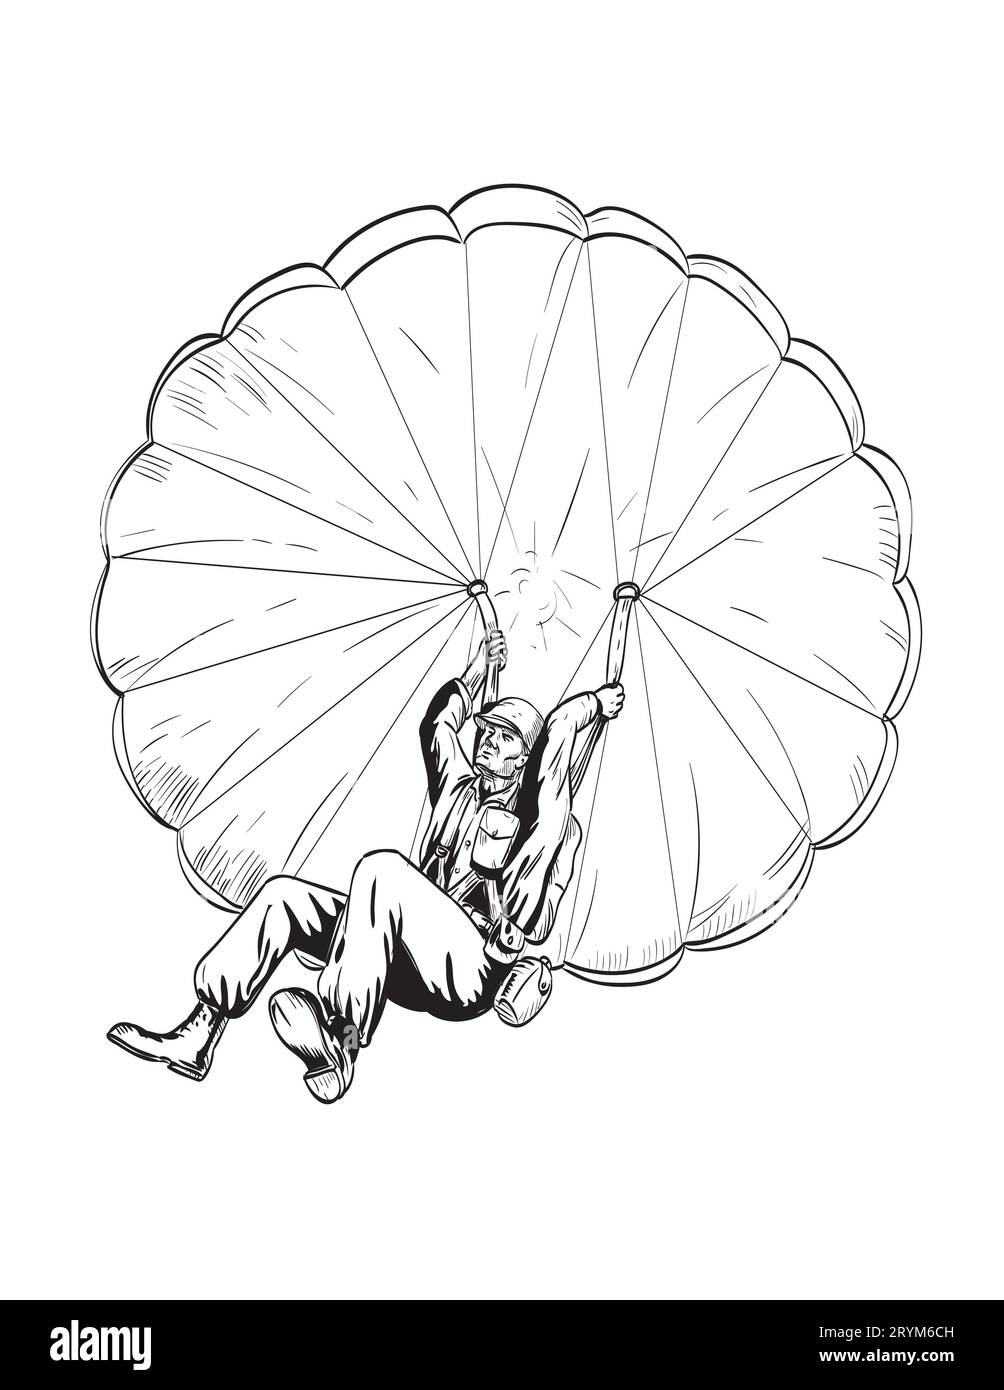 World War Two American GI Soldier Paratrooper Military Parachutist Viewed from Low Angle Comics Style Drawing Stock Photo